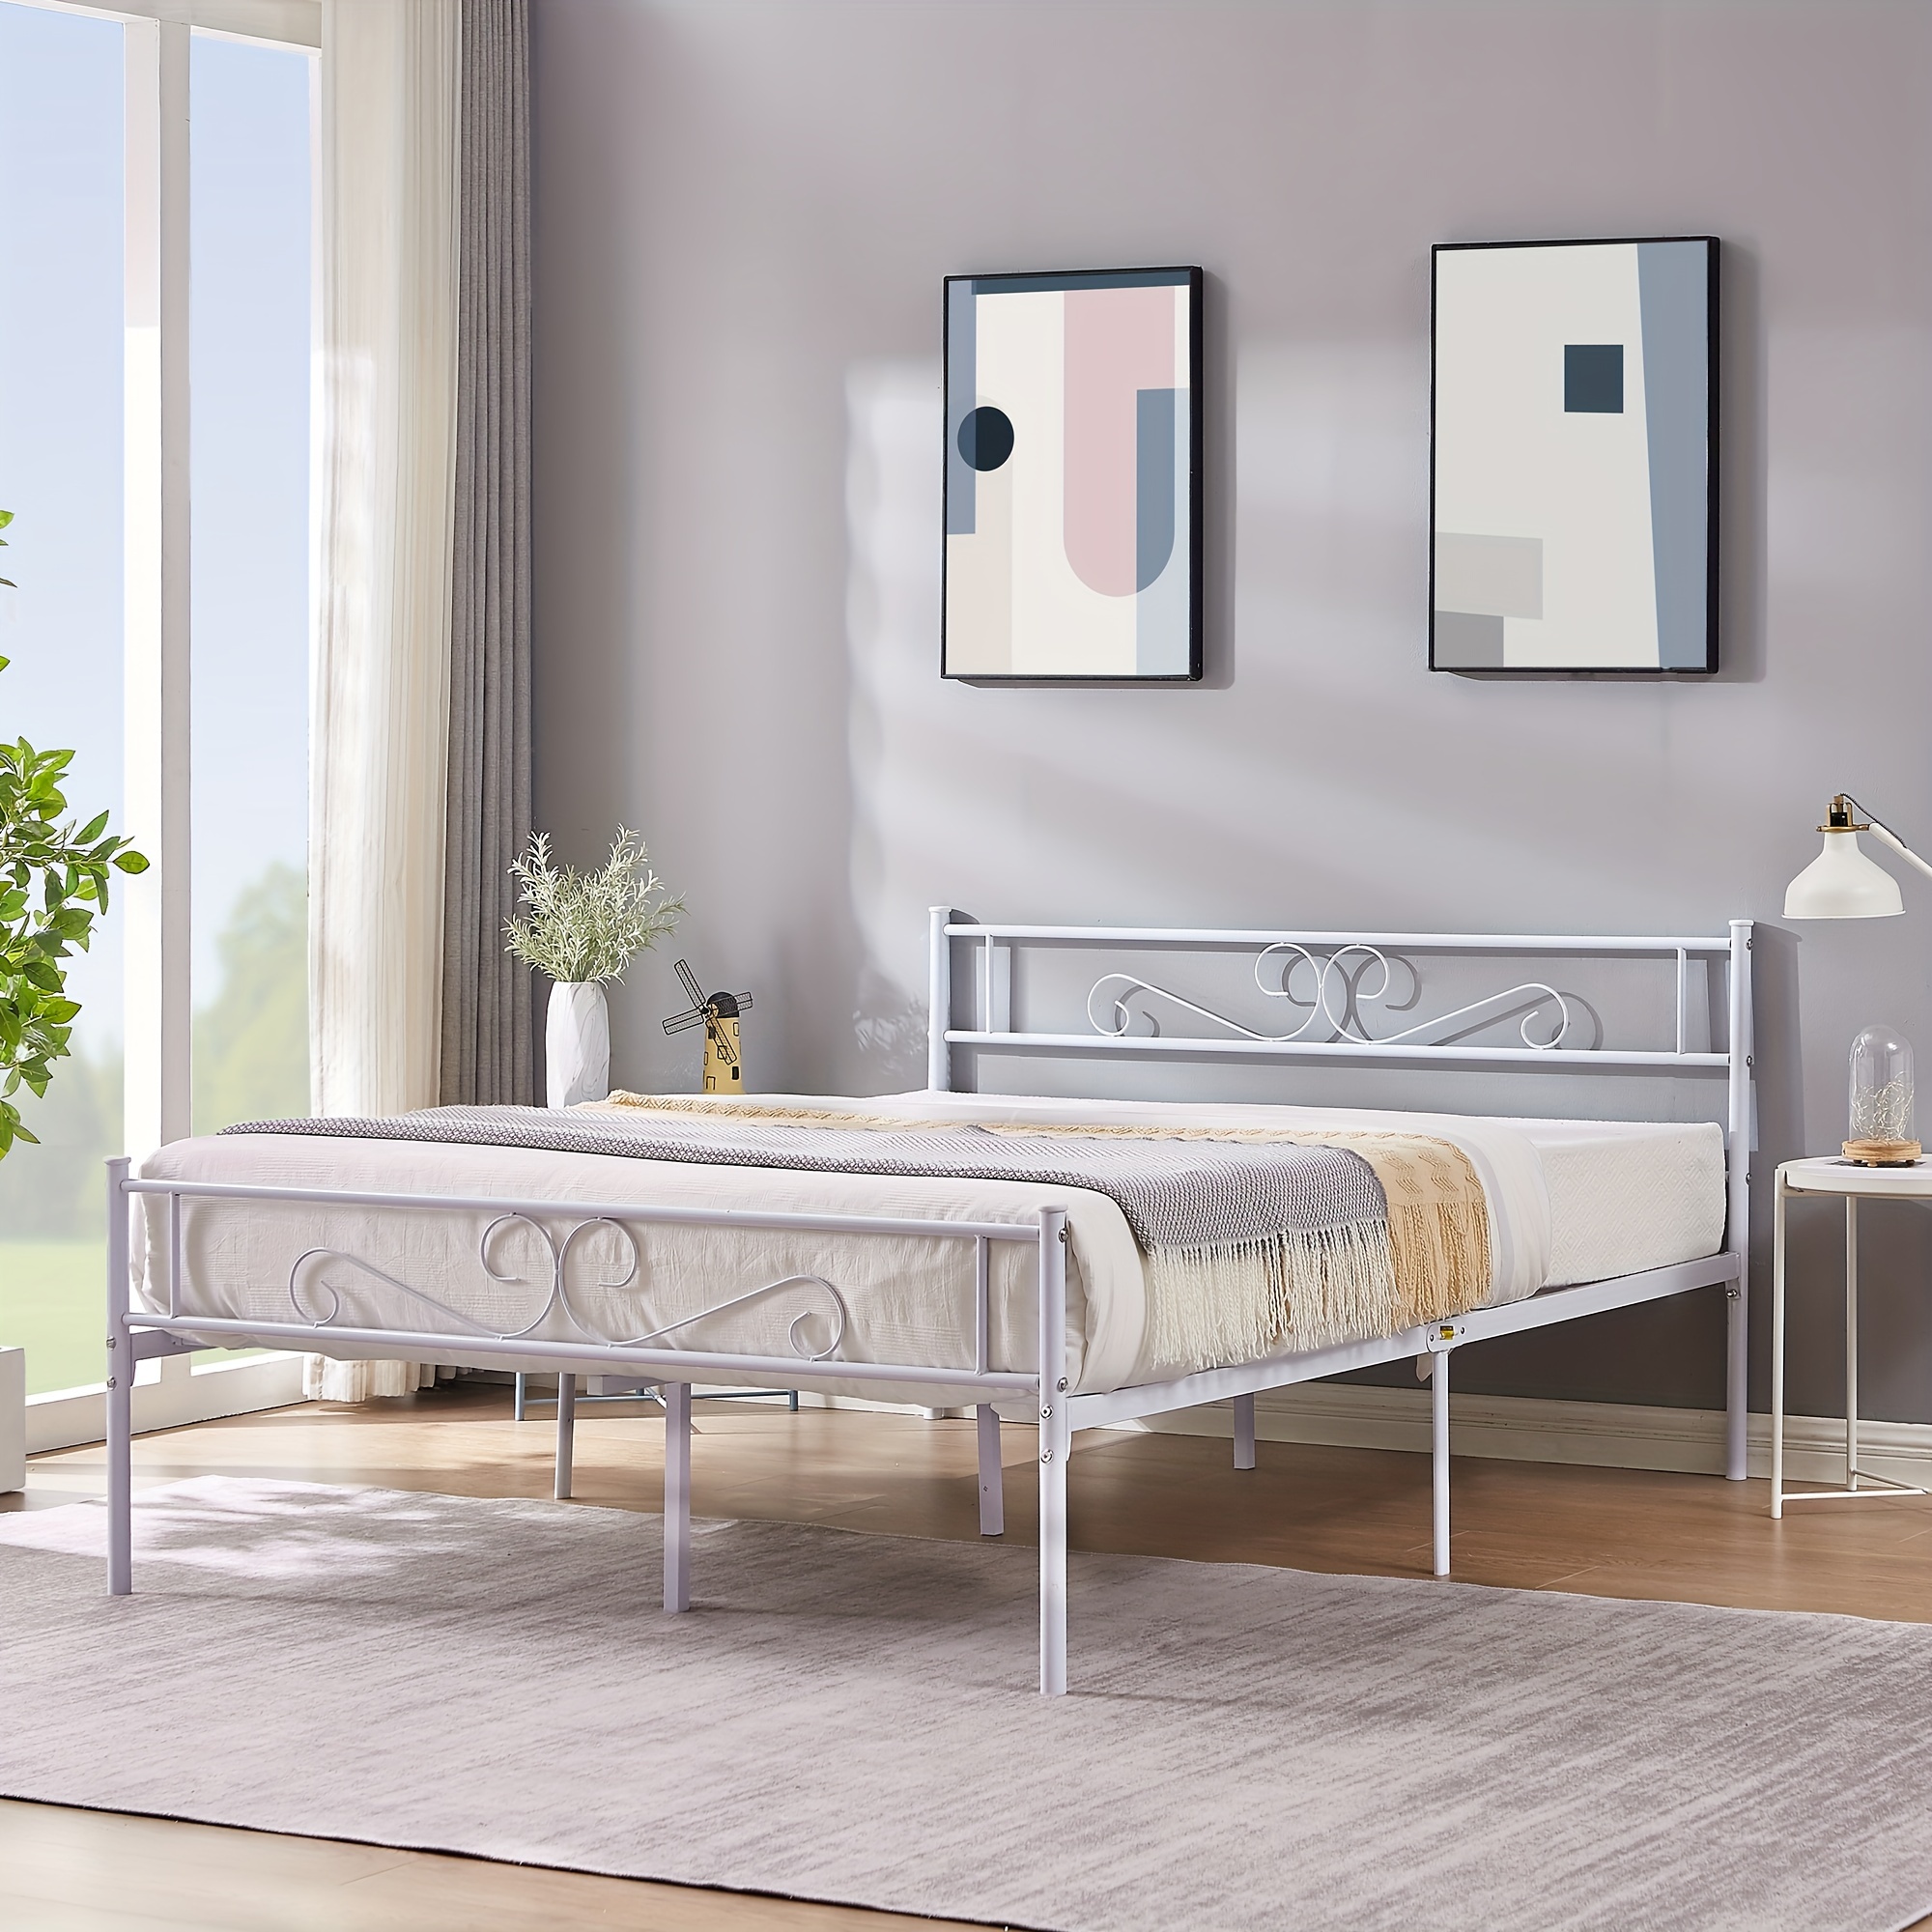 

1pc Vecelo Metal Bed Frame With Headboard & Footboard, Contemporary Style, White, With Under-bed Storage Space